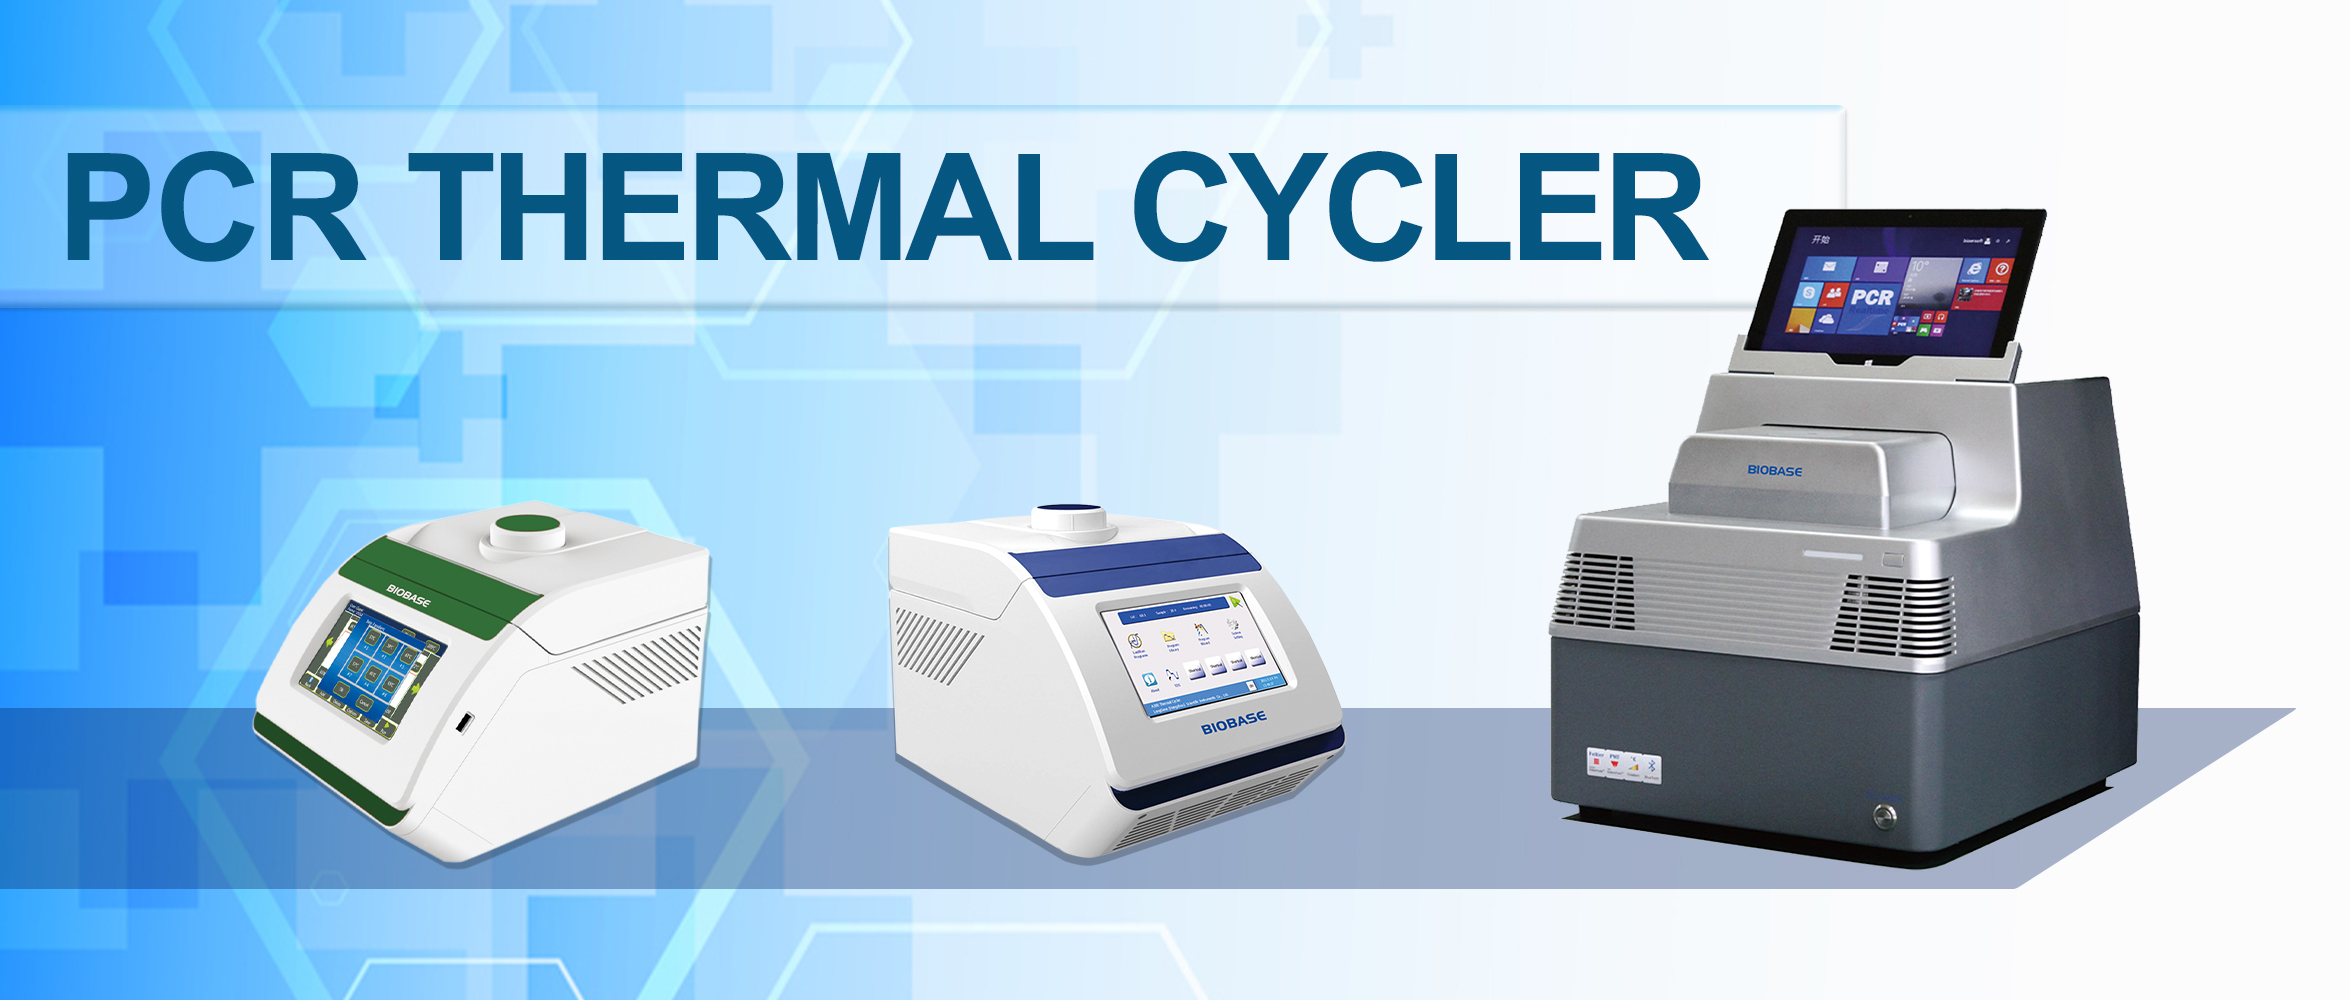 Thermocyclers: More than Just PCR Machines